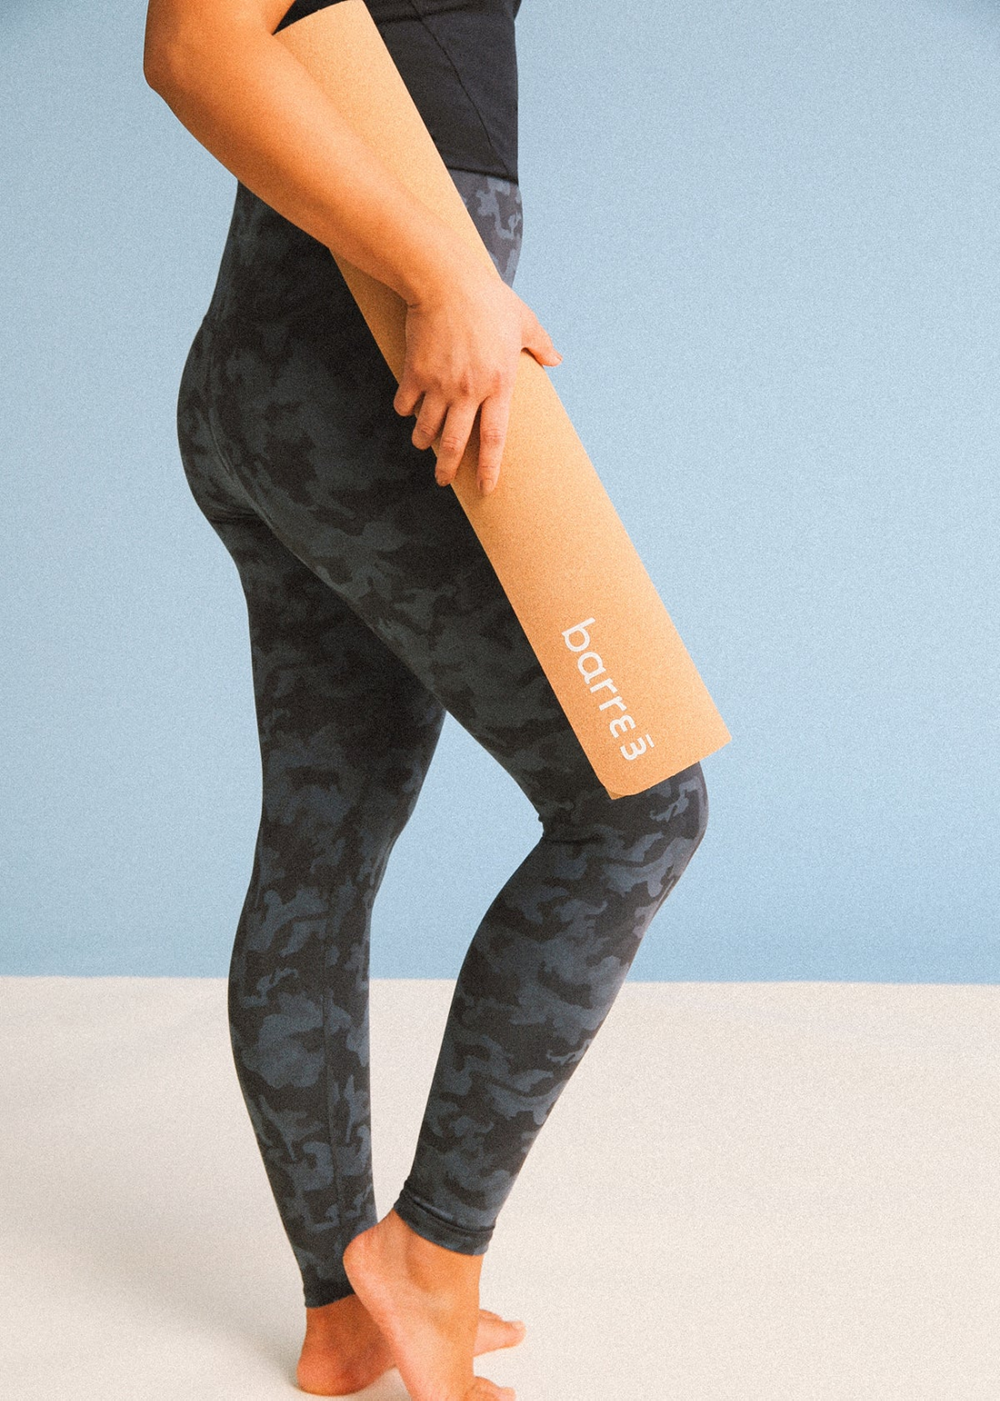 Exercise Mat – barre3